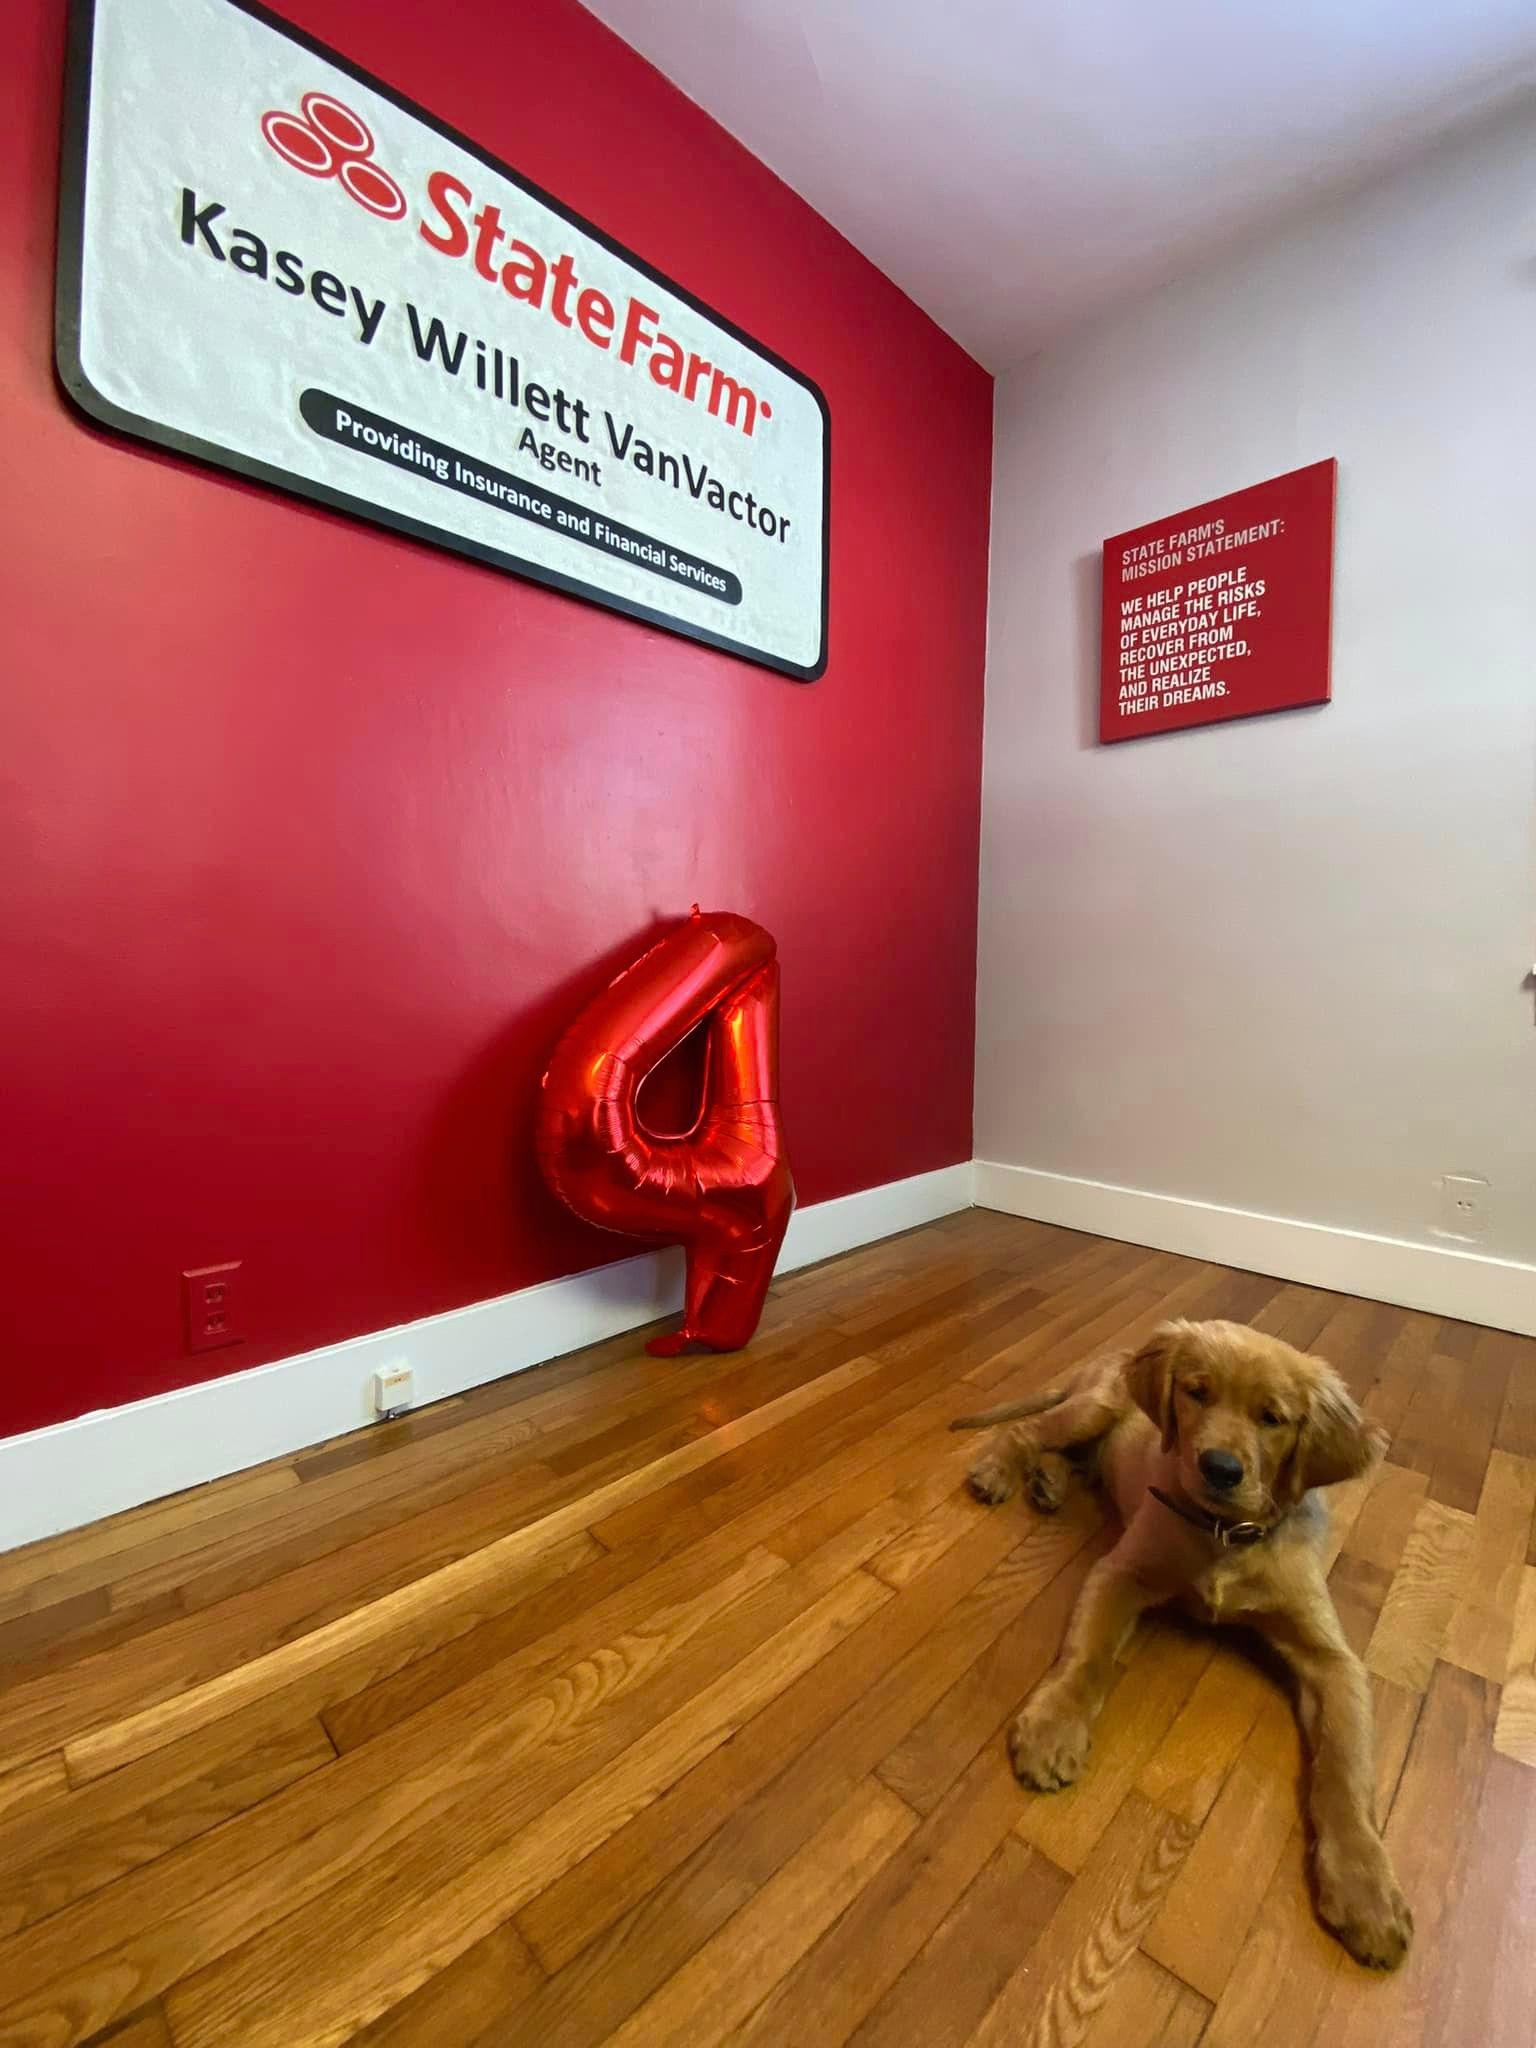 Interior of our agency with our team mascot!